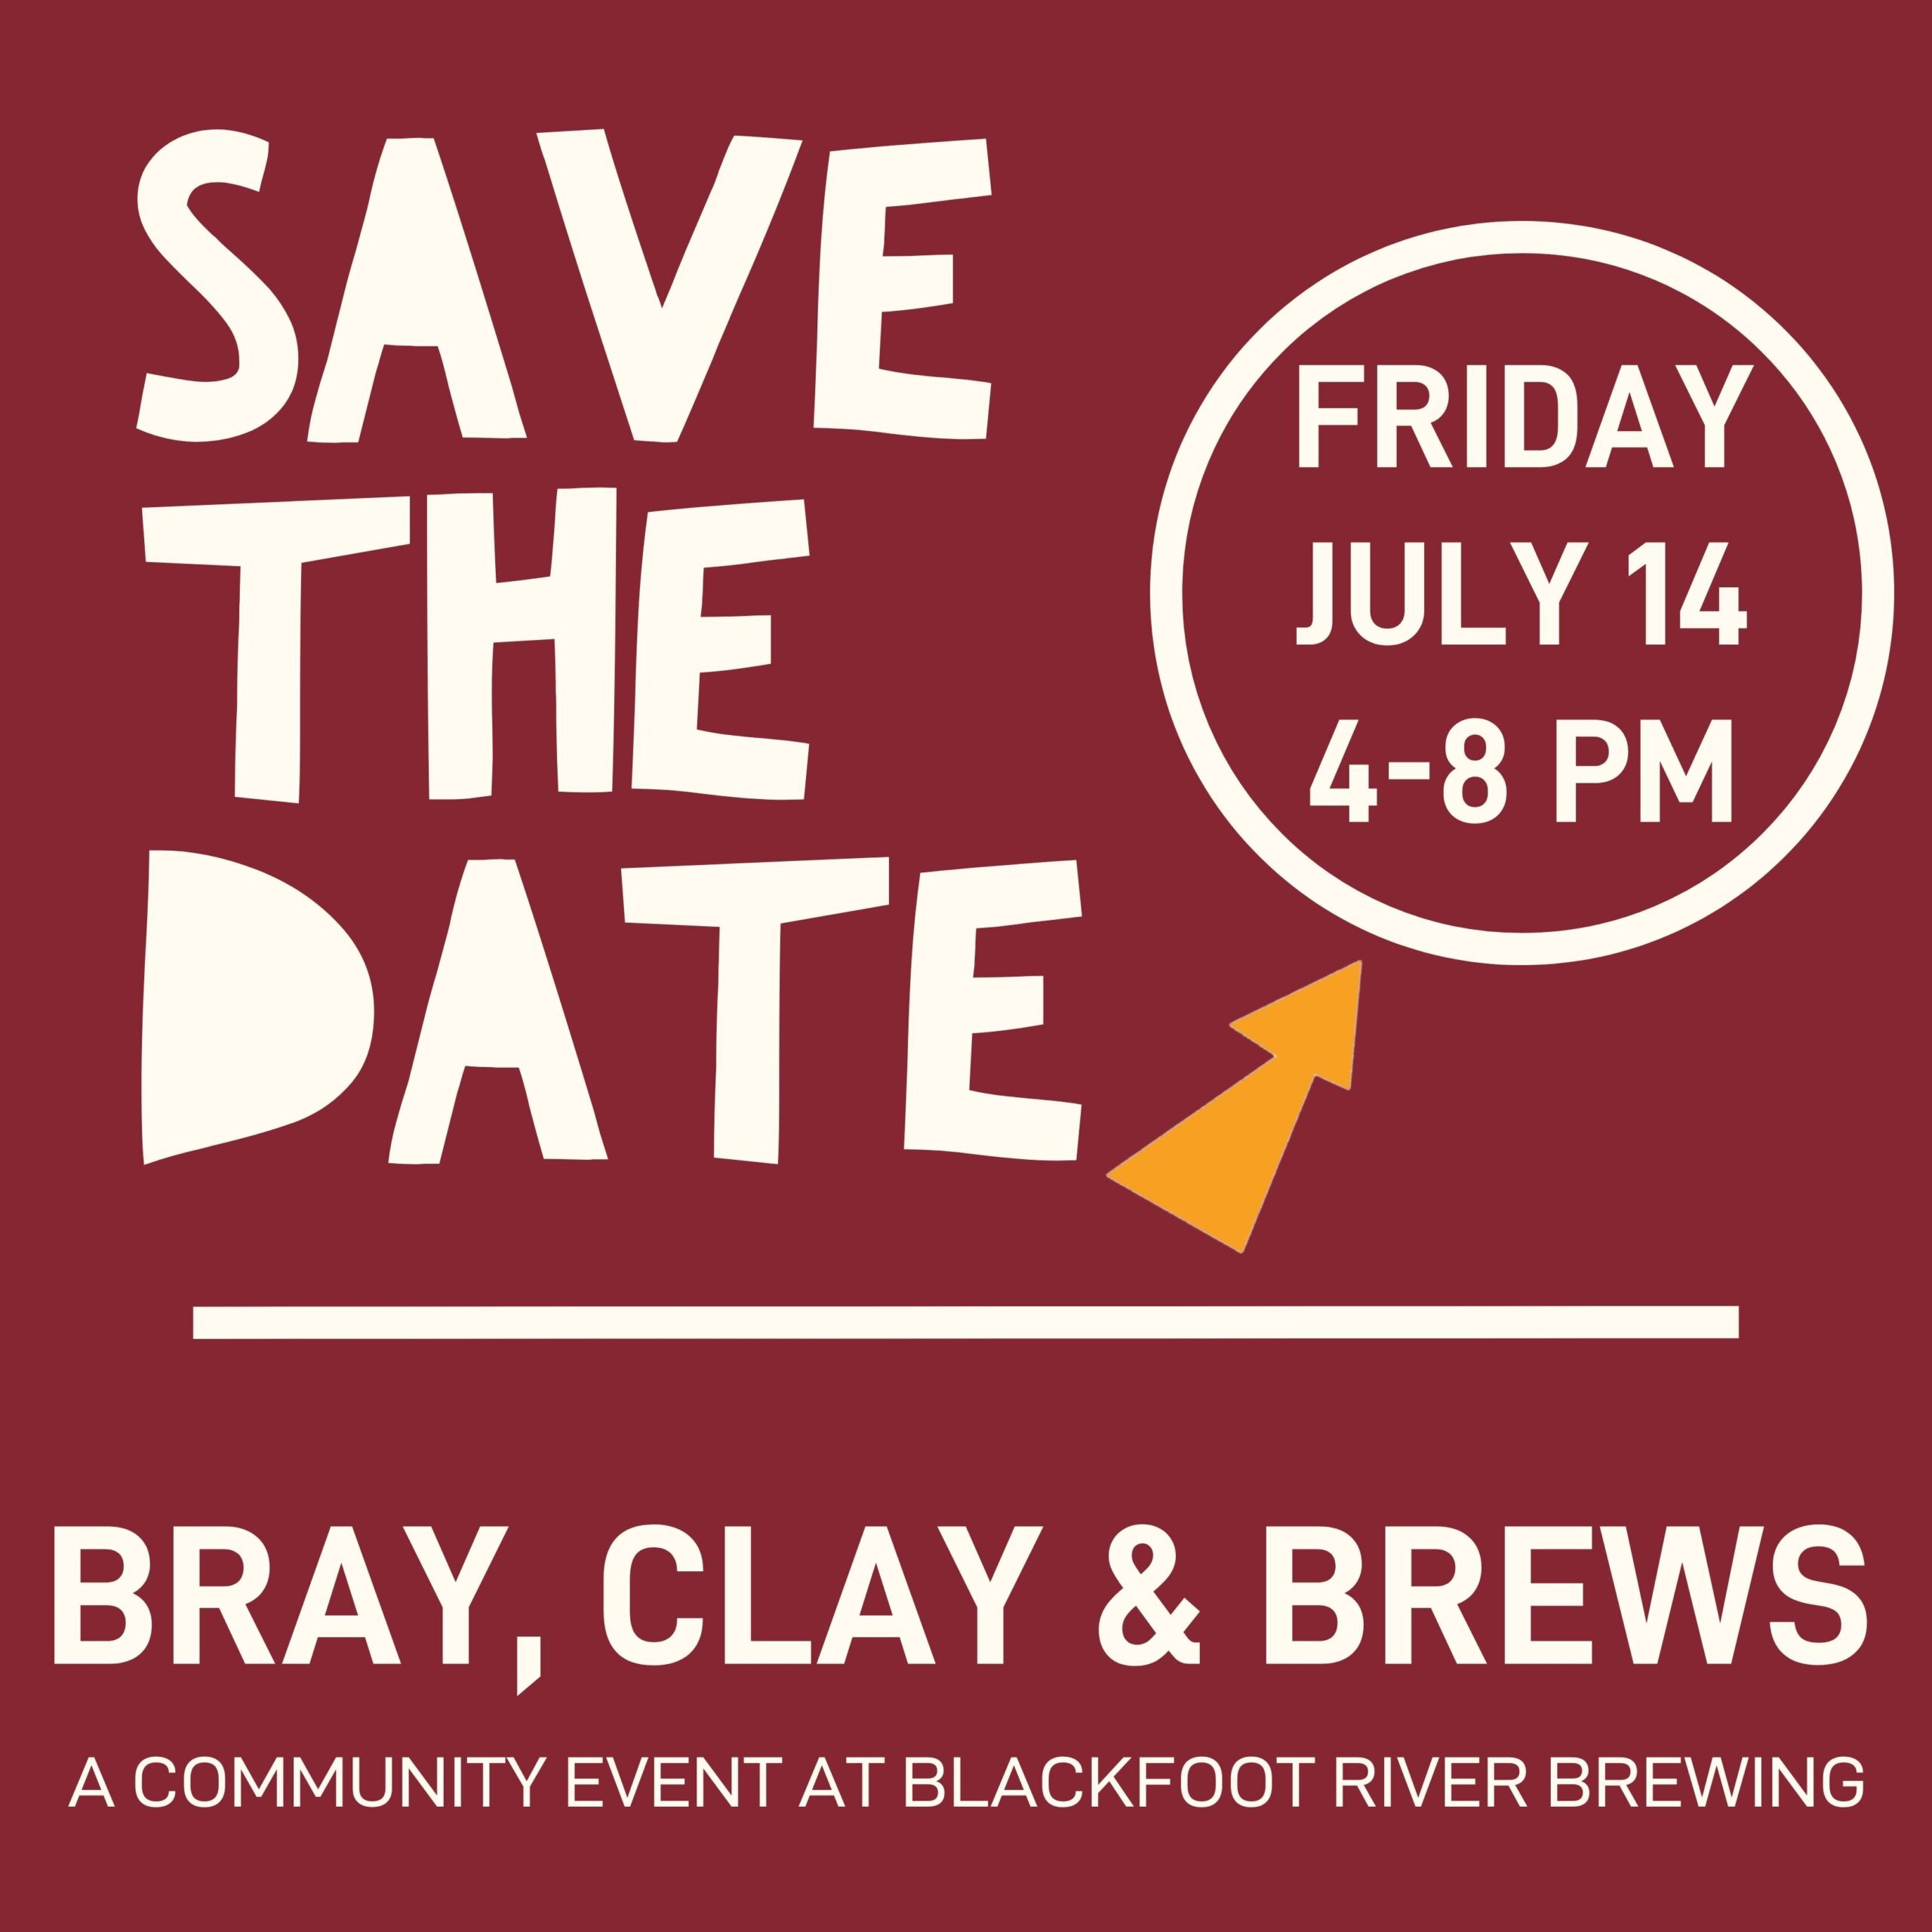 Save the Date for Bray Clay and Brews at Blackfoot River Brewing, July 14, from 4-8 pm